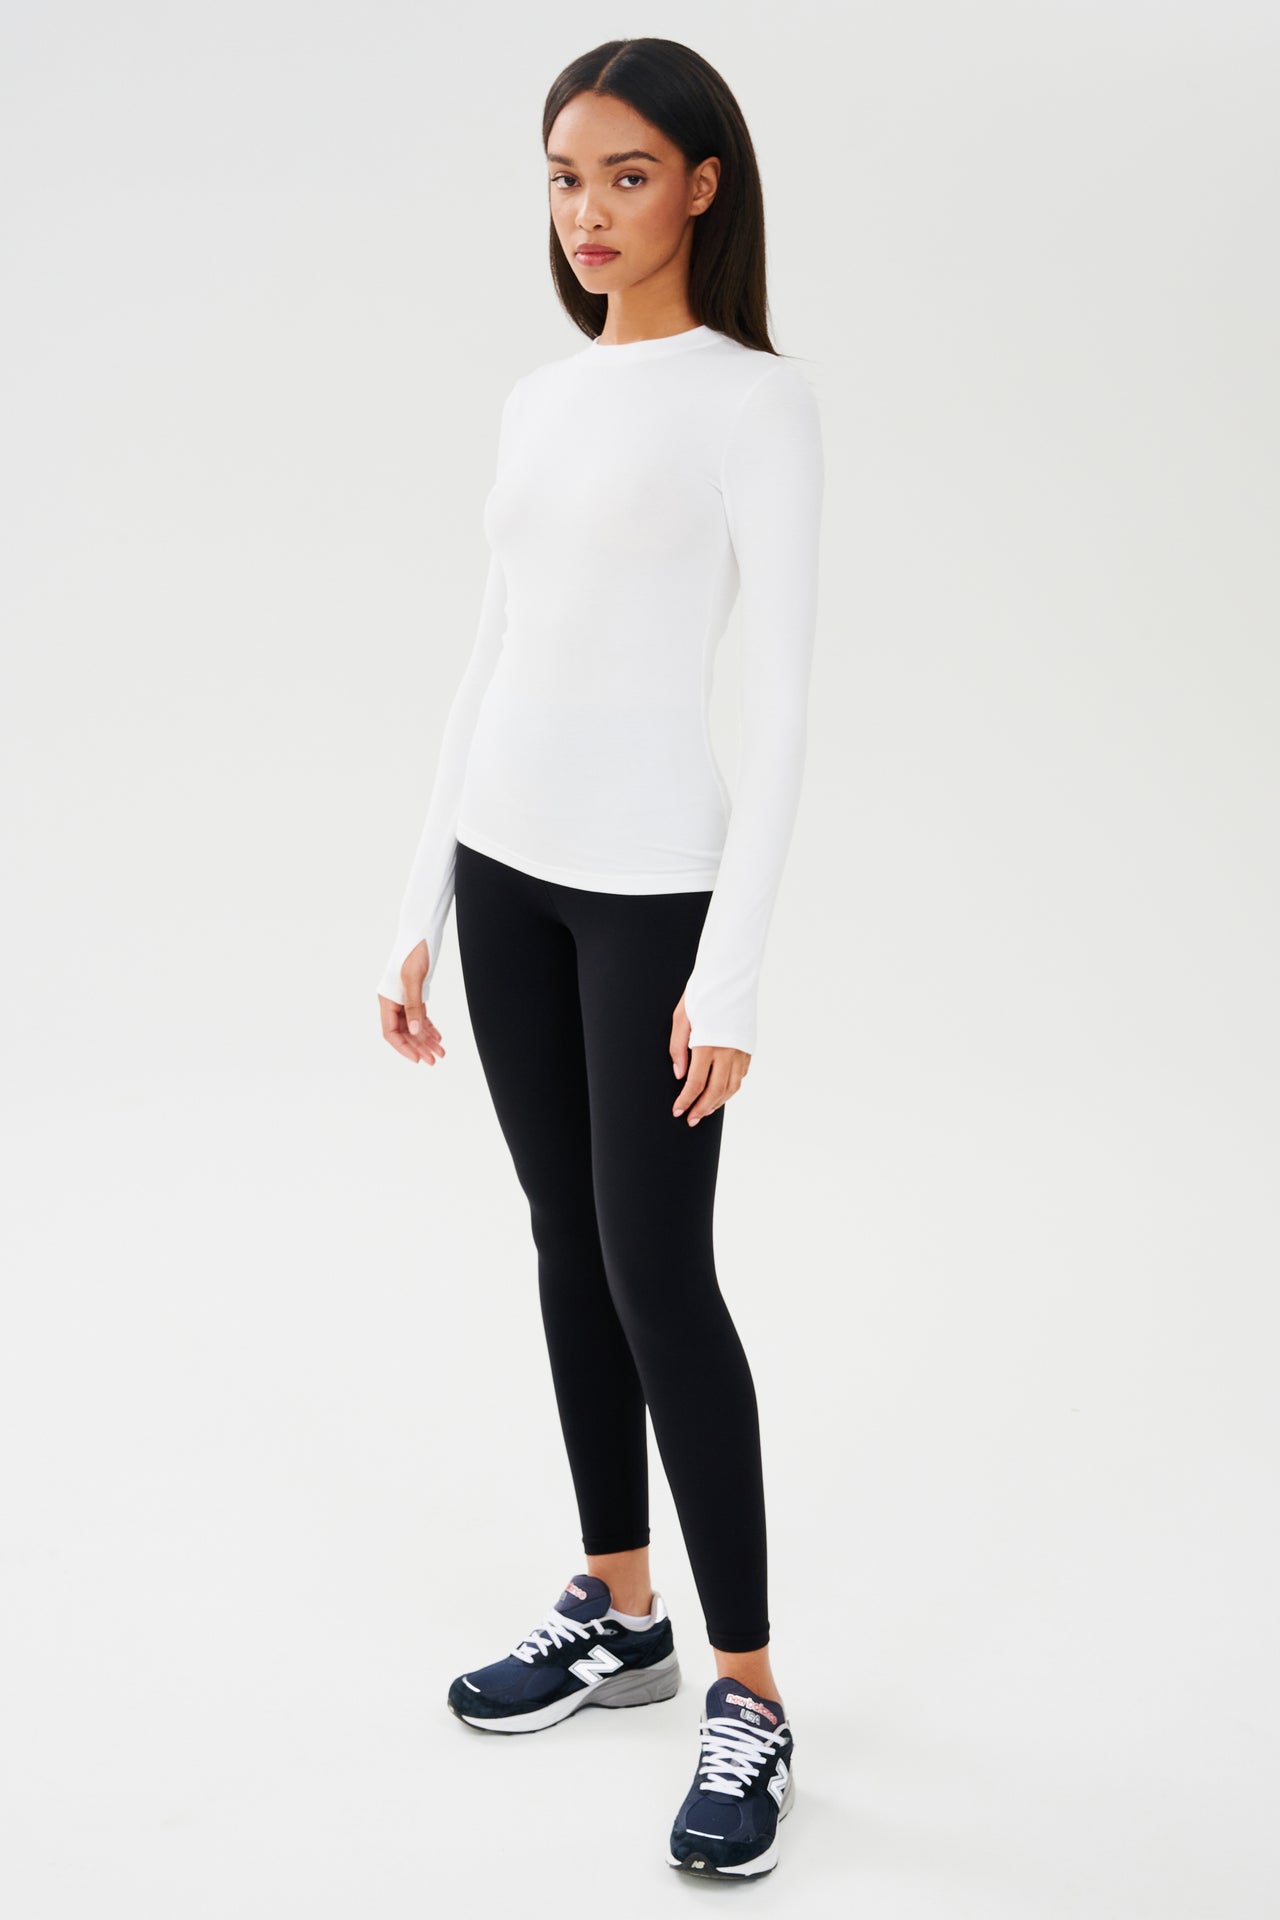 A woman wearing a SPLITS59 Louise Rib Long Sleeve in White and black leggings, perfect for yoga or gym workouts.